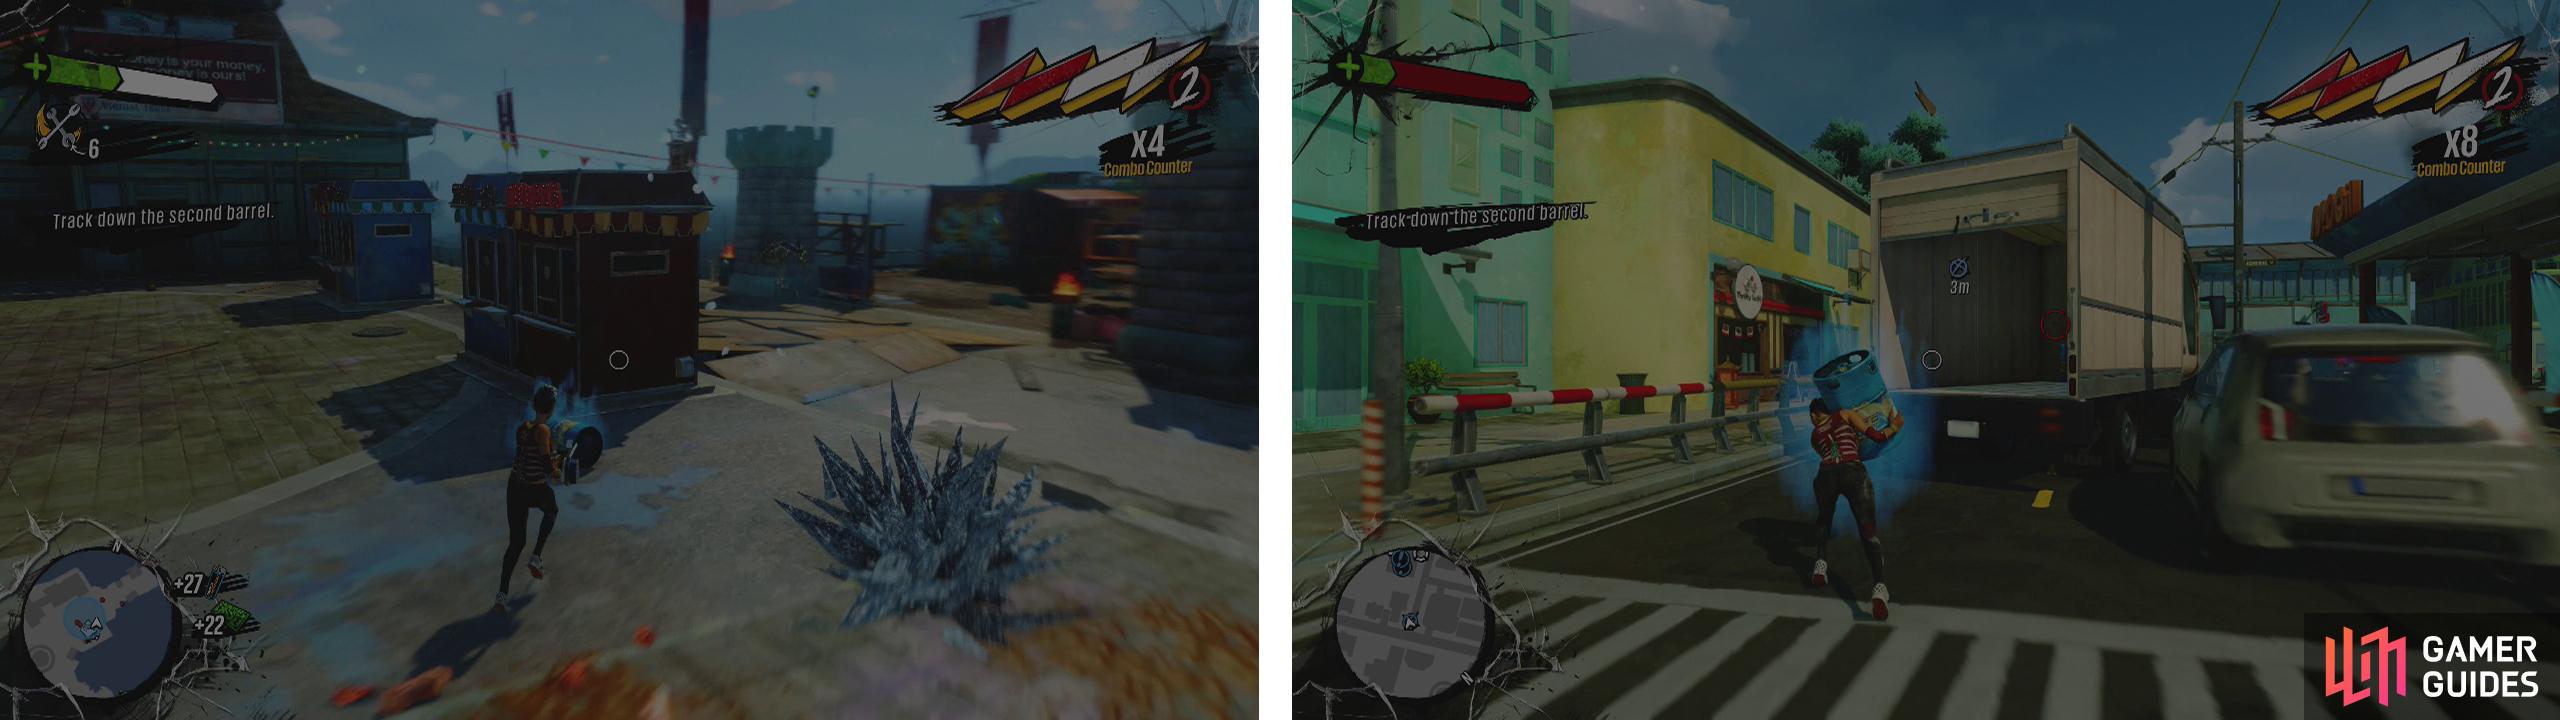 Essentially we need to find barrels of overcharge (left) and place them into the truck (right). Rinse and repeat!